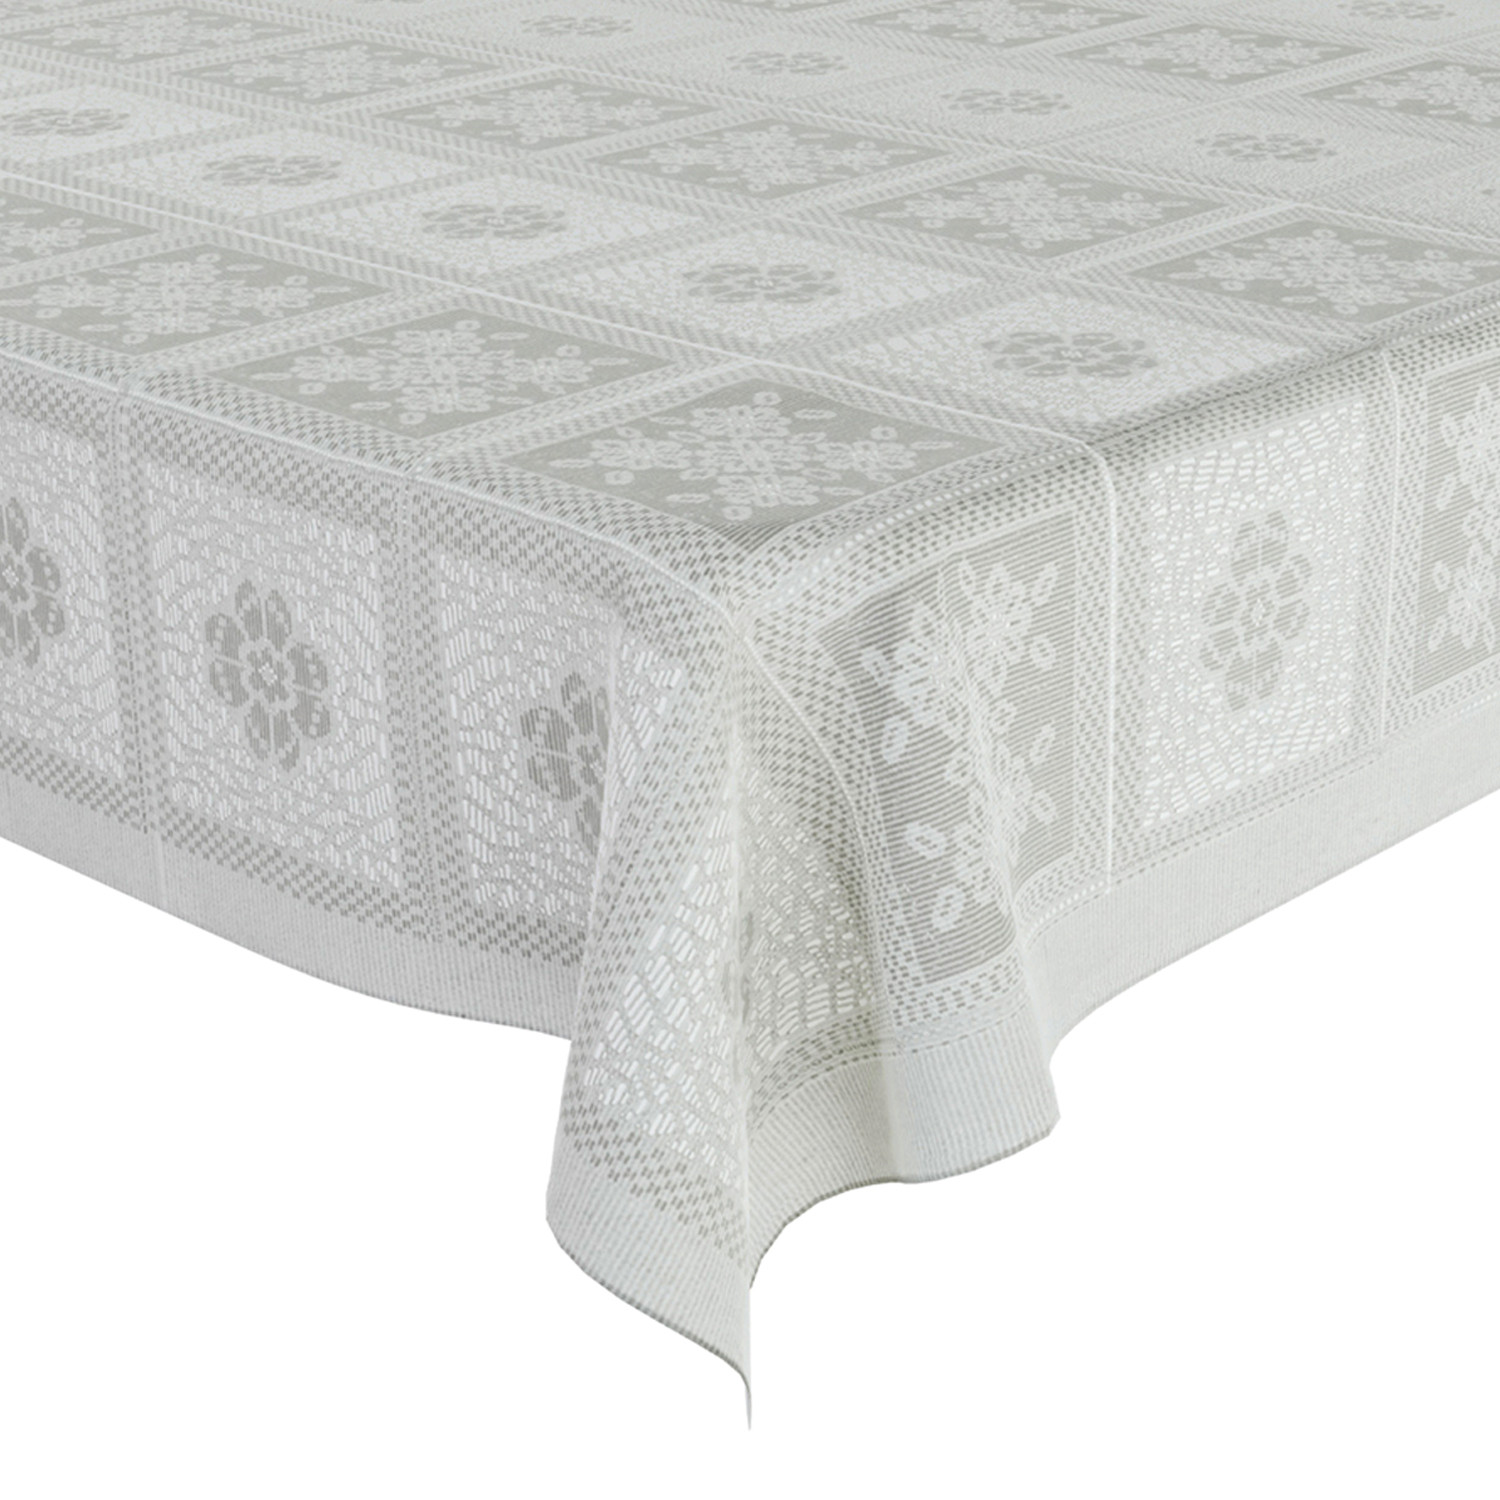 Kuber Industries Dining Table Cover | Cotton Net Square Flower Pattern | Tablecloth for Home Décor | Tablecloth for Dining Area | 60X90 Inch | White